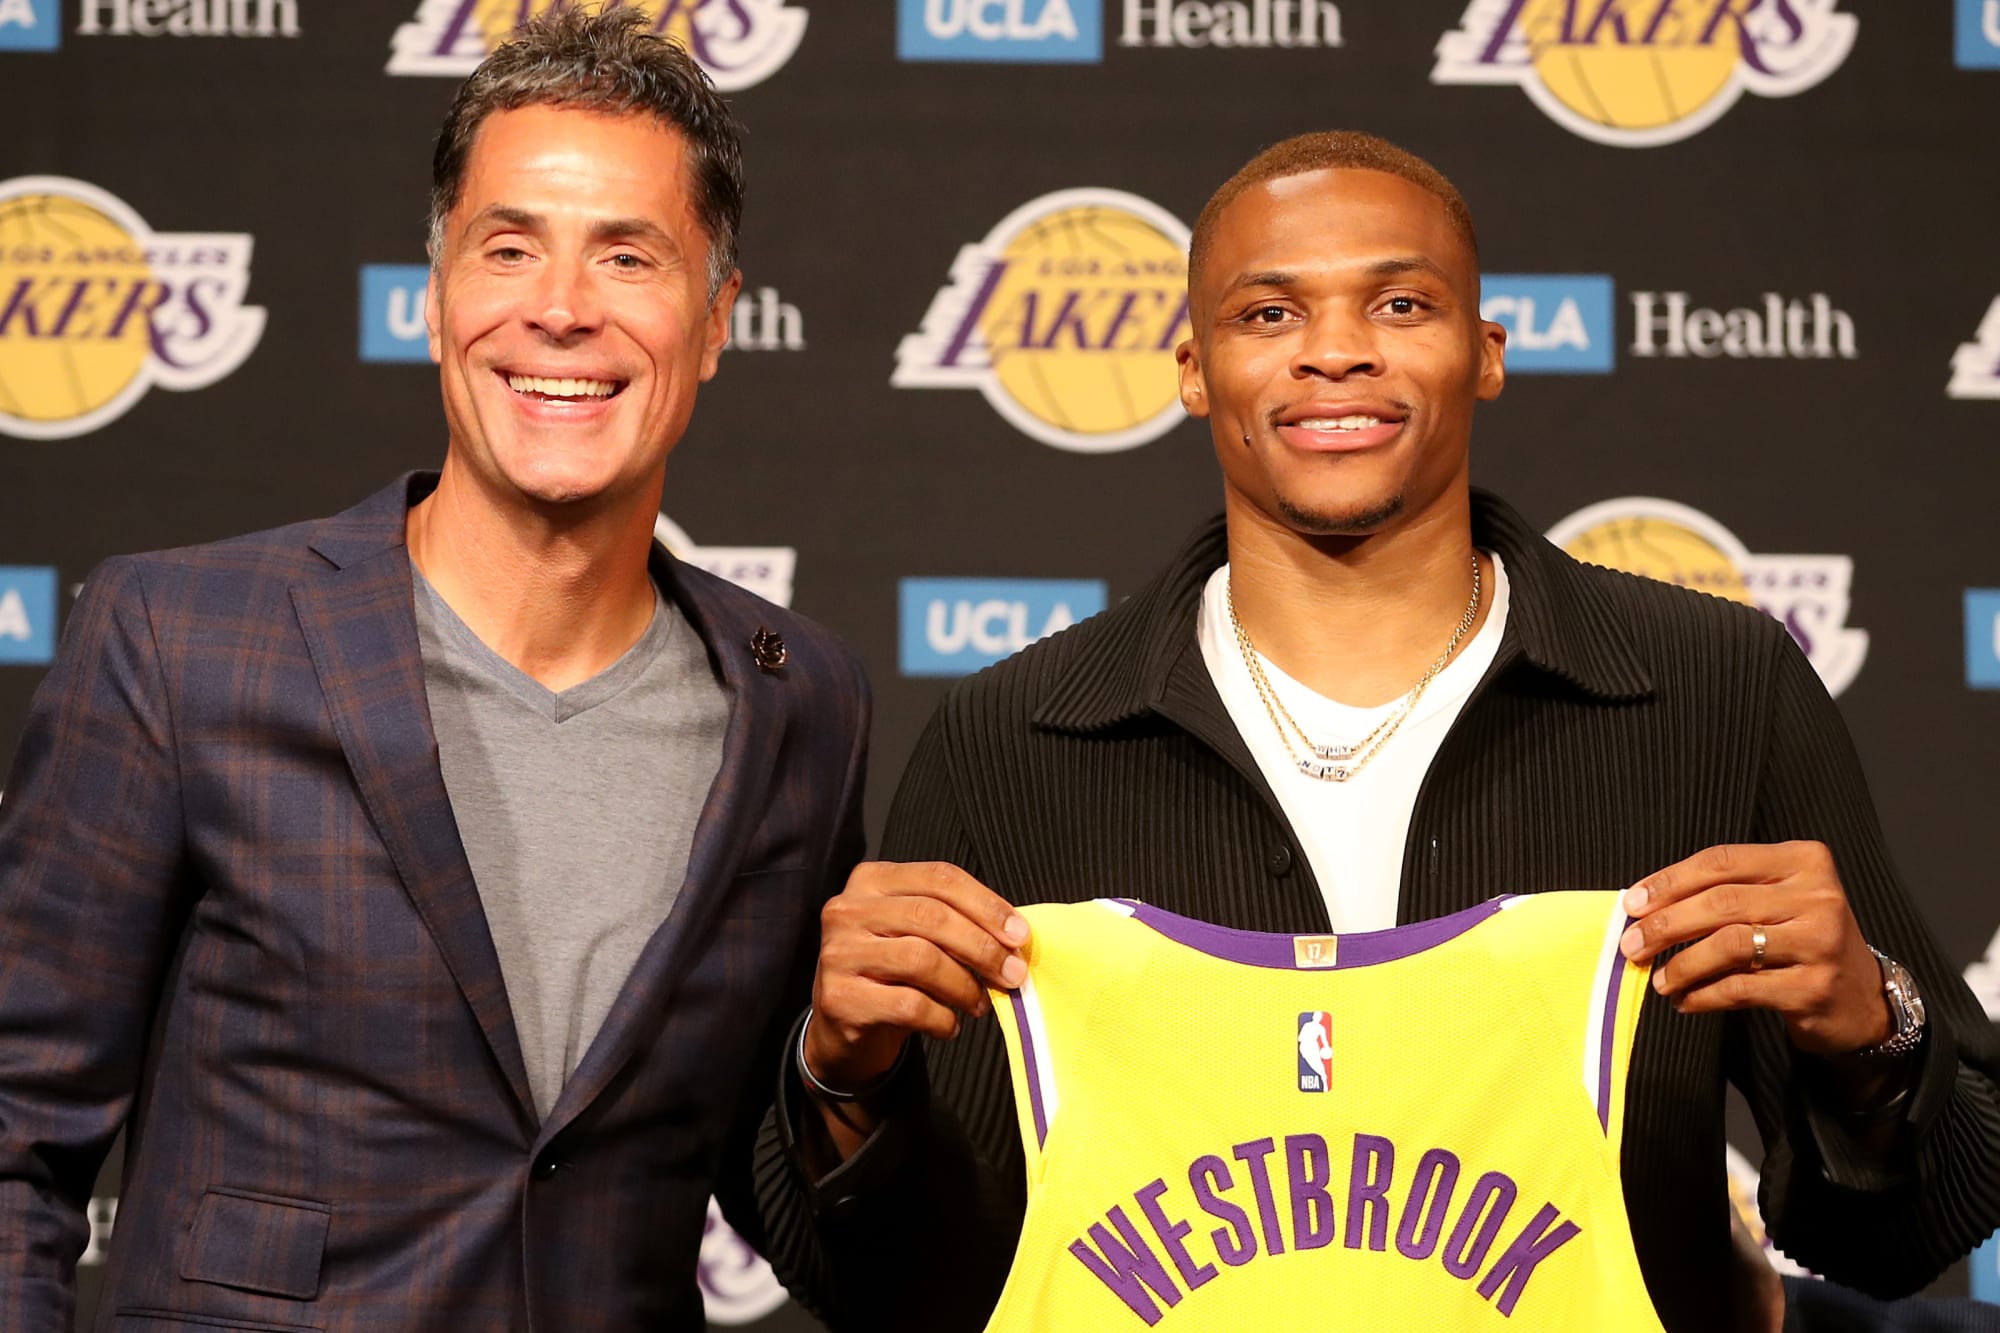 Previous Lakers trade report will undoubtedly frustrate fans